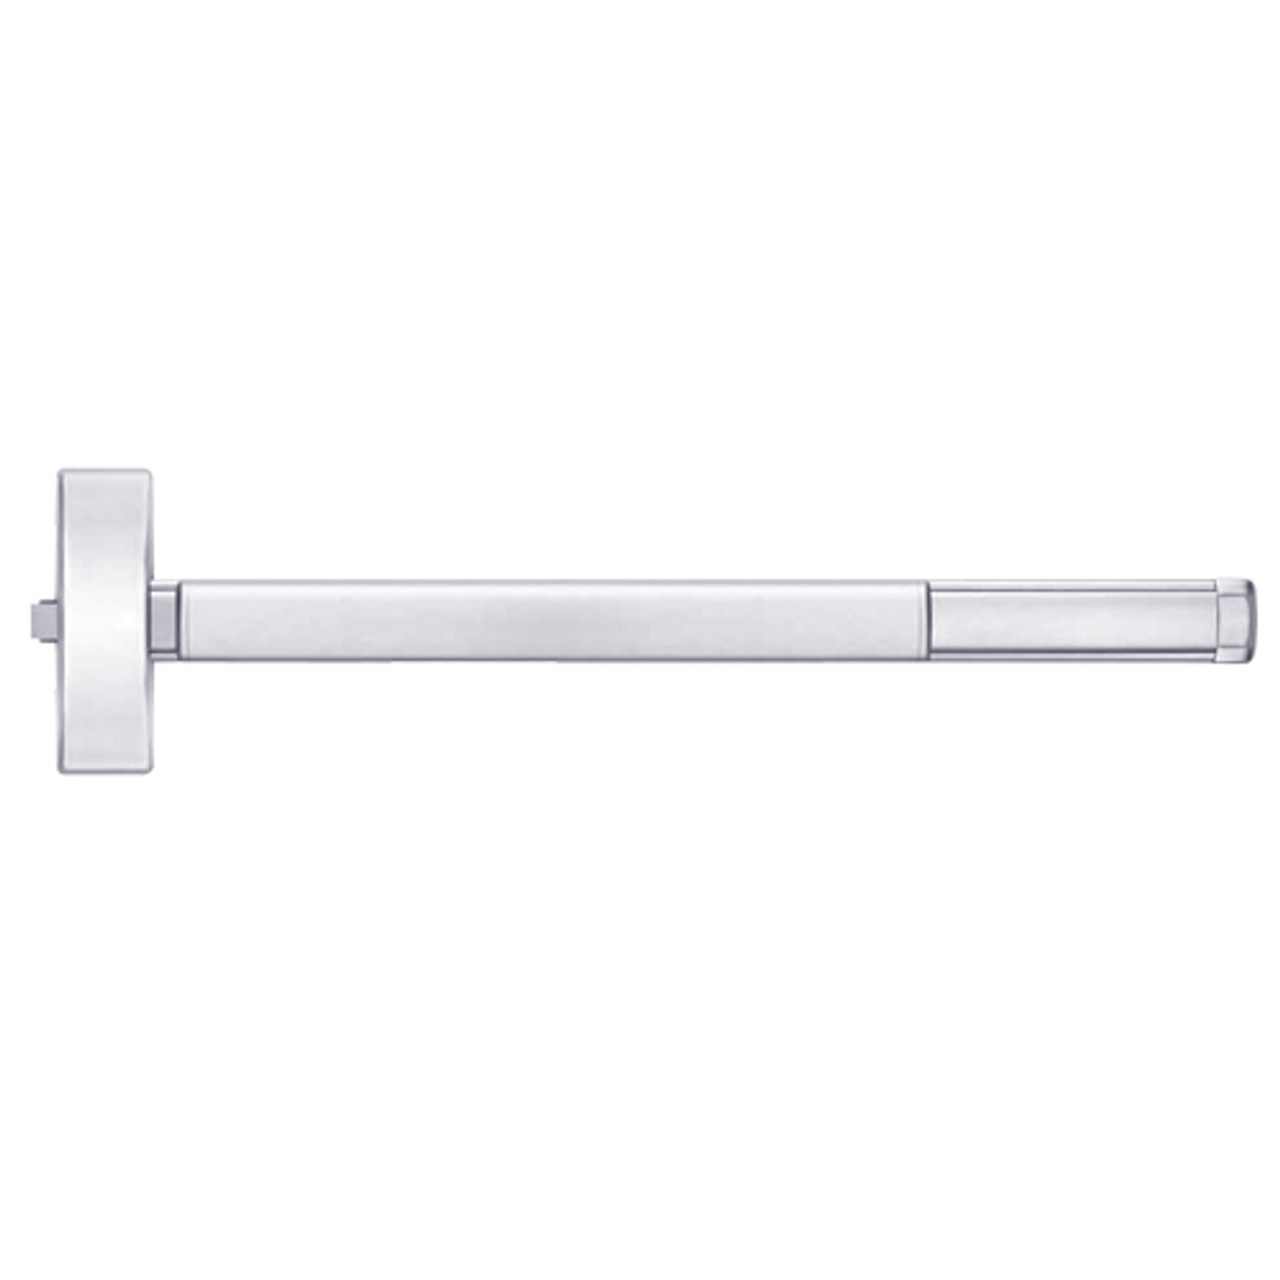 FL2115-625-48 PHI 2100 Series Fire Rated Apex Rim Exit Device Prepped for Thumb Piece Always Active in Bright Chrome Finish